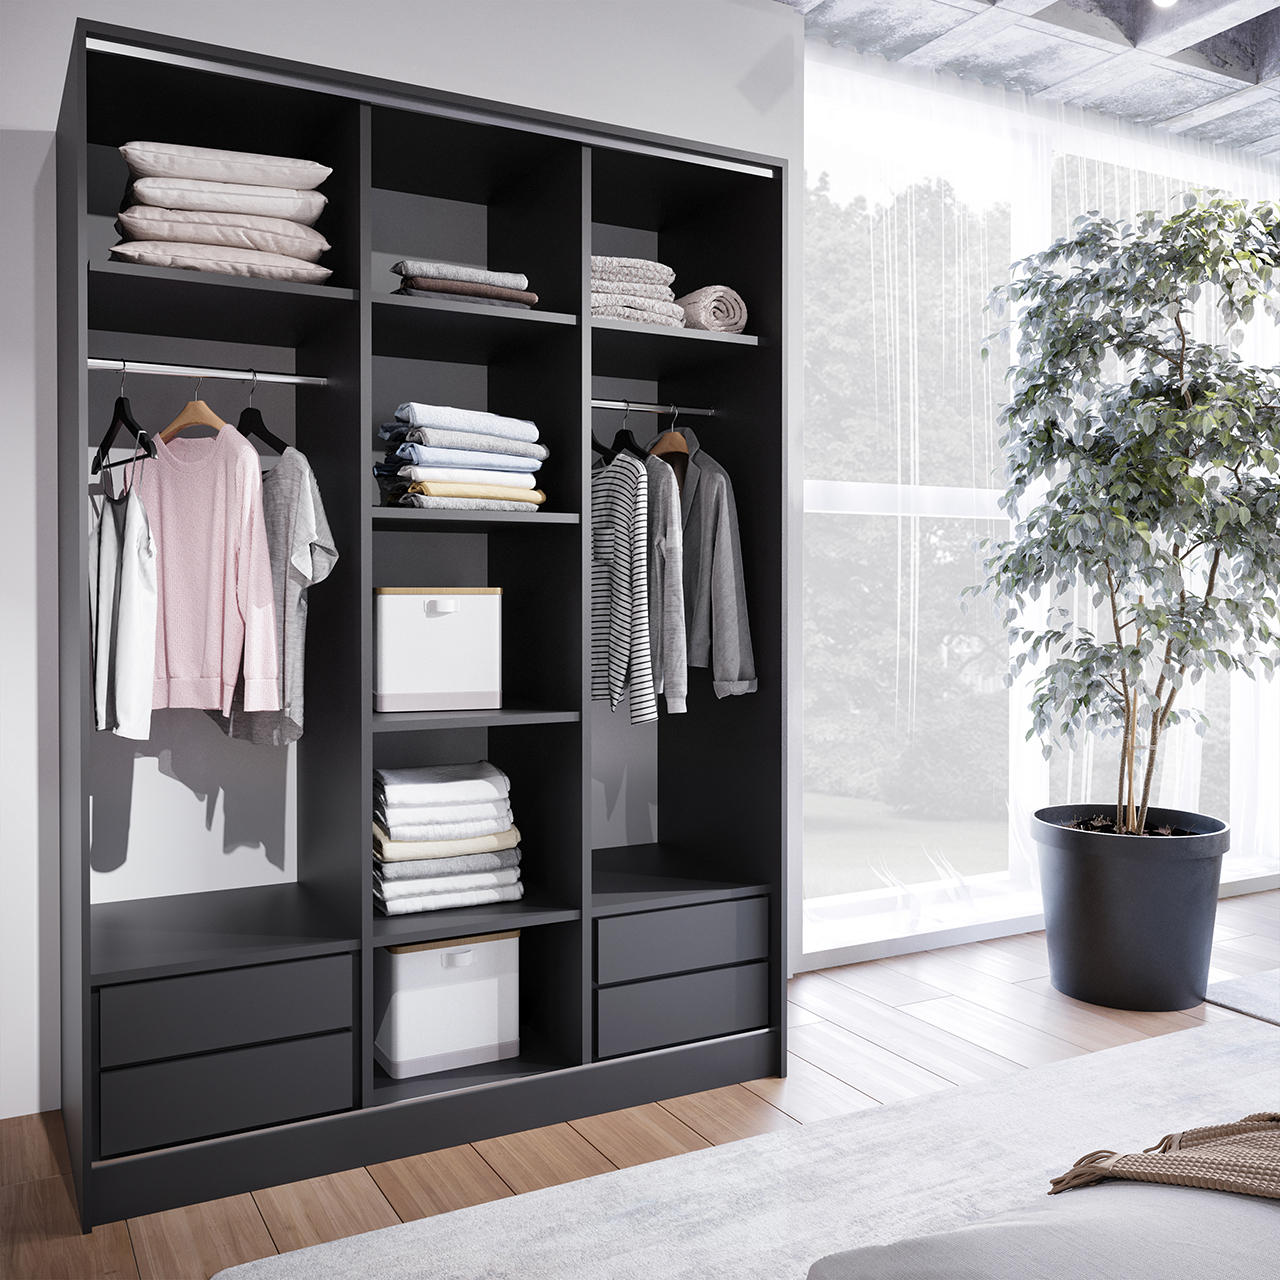 Sliding Wardrobe with Drawers BRITTO D 150 black